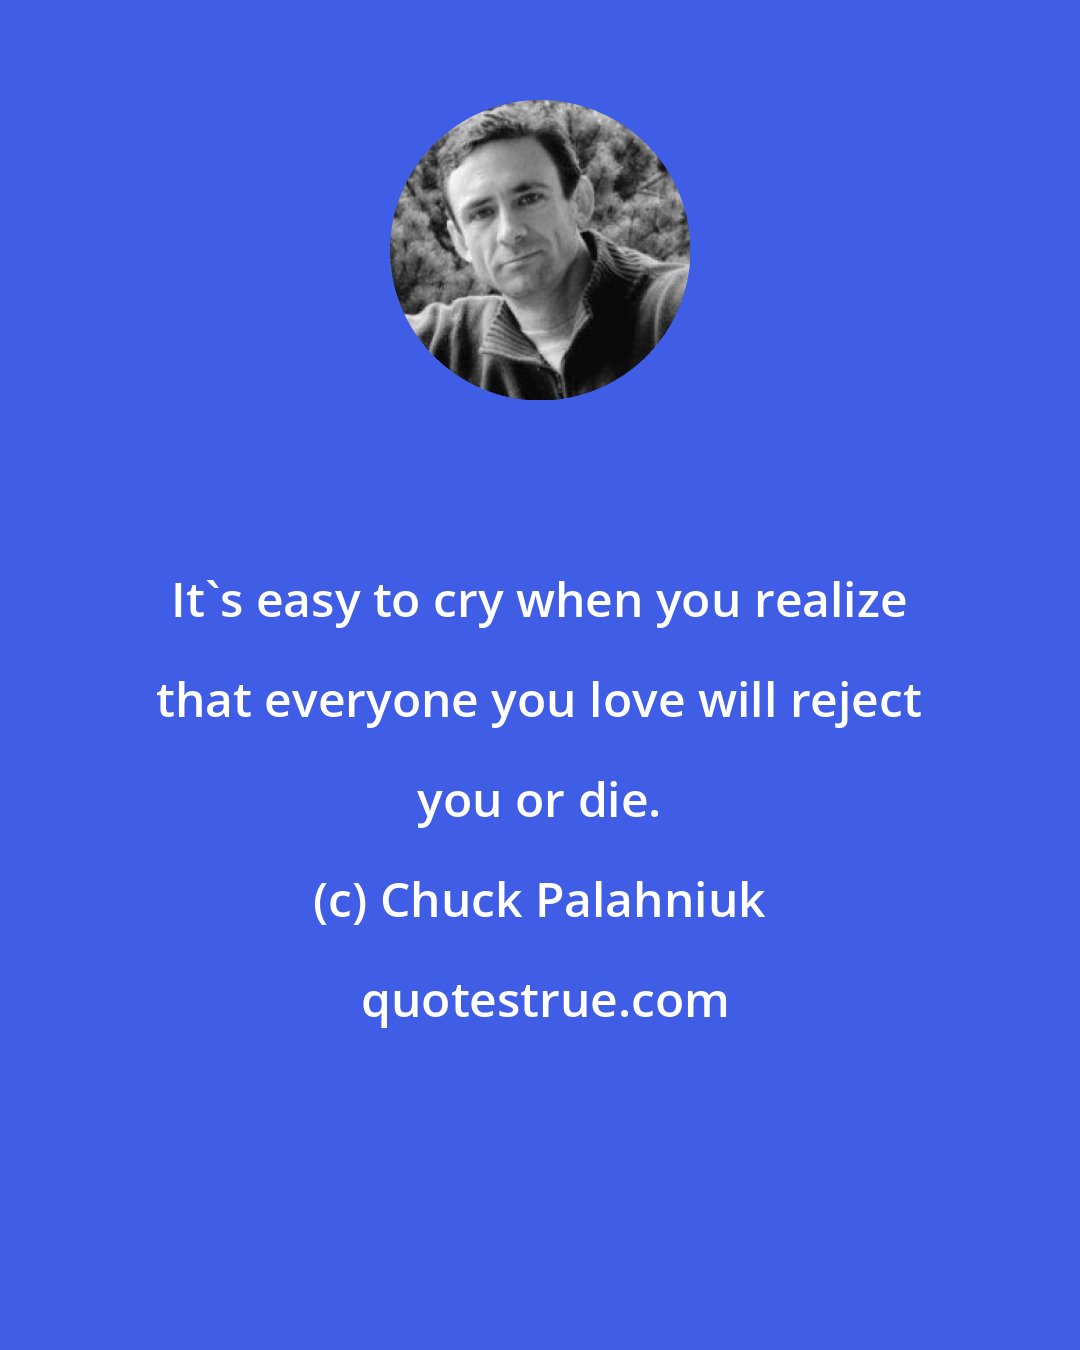 Chuck Palahniuk: It's easy to cry when you realize that everyone you love will reject you or die.